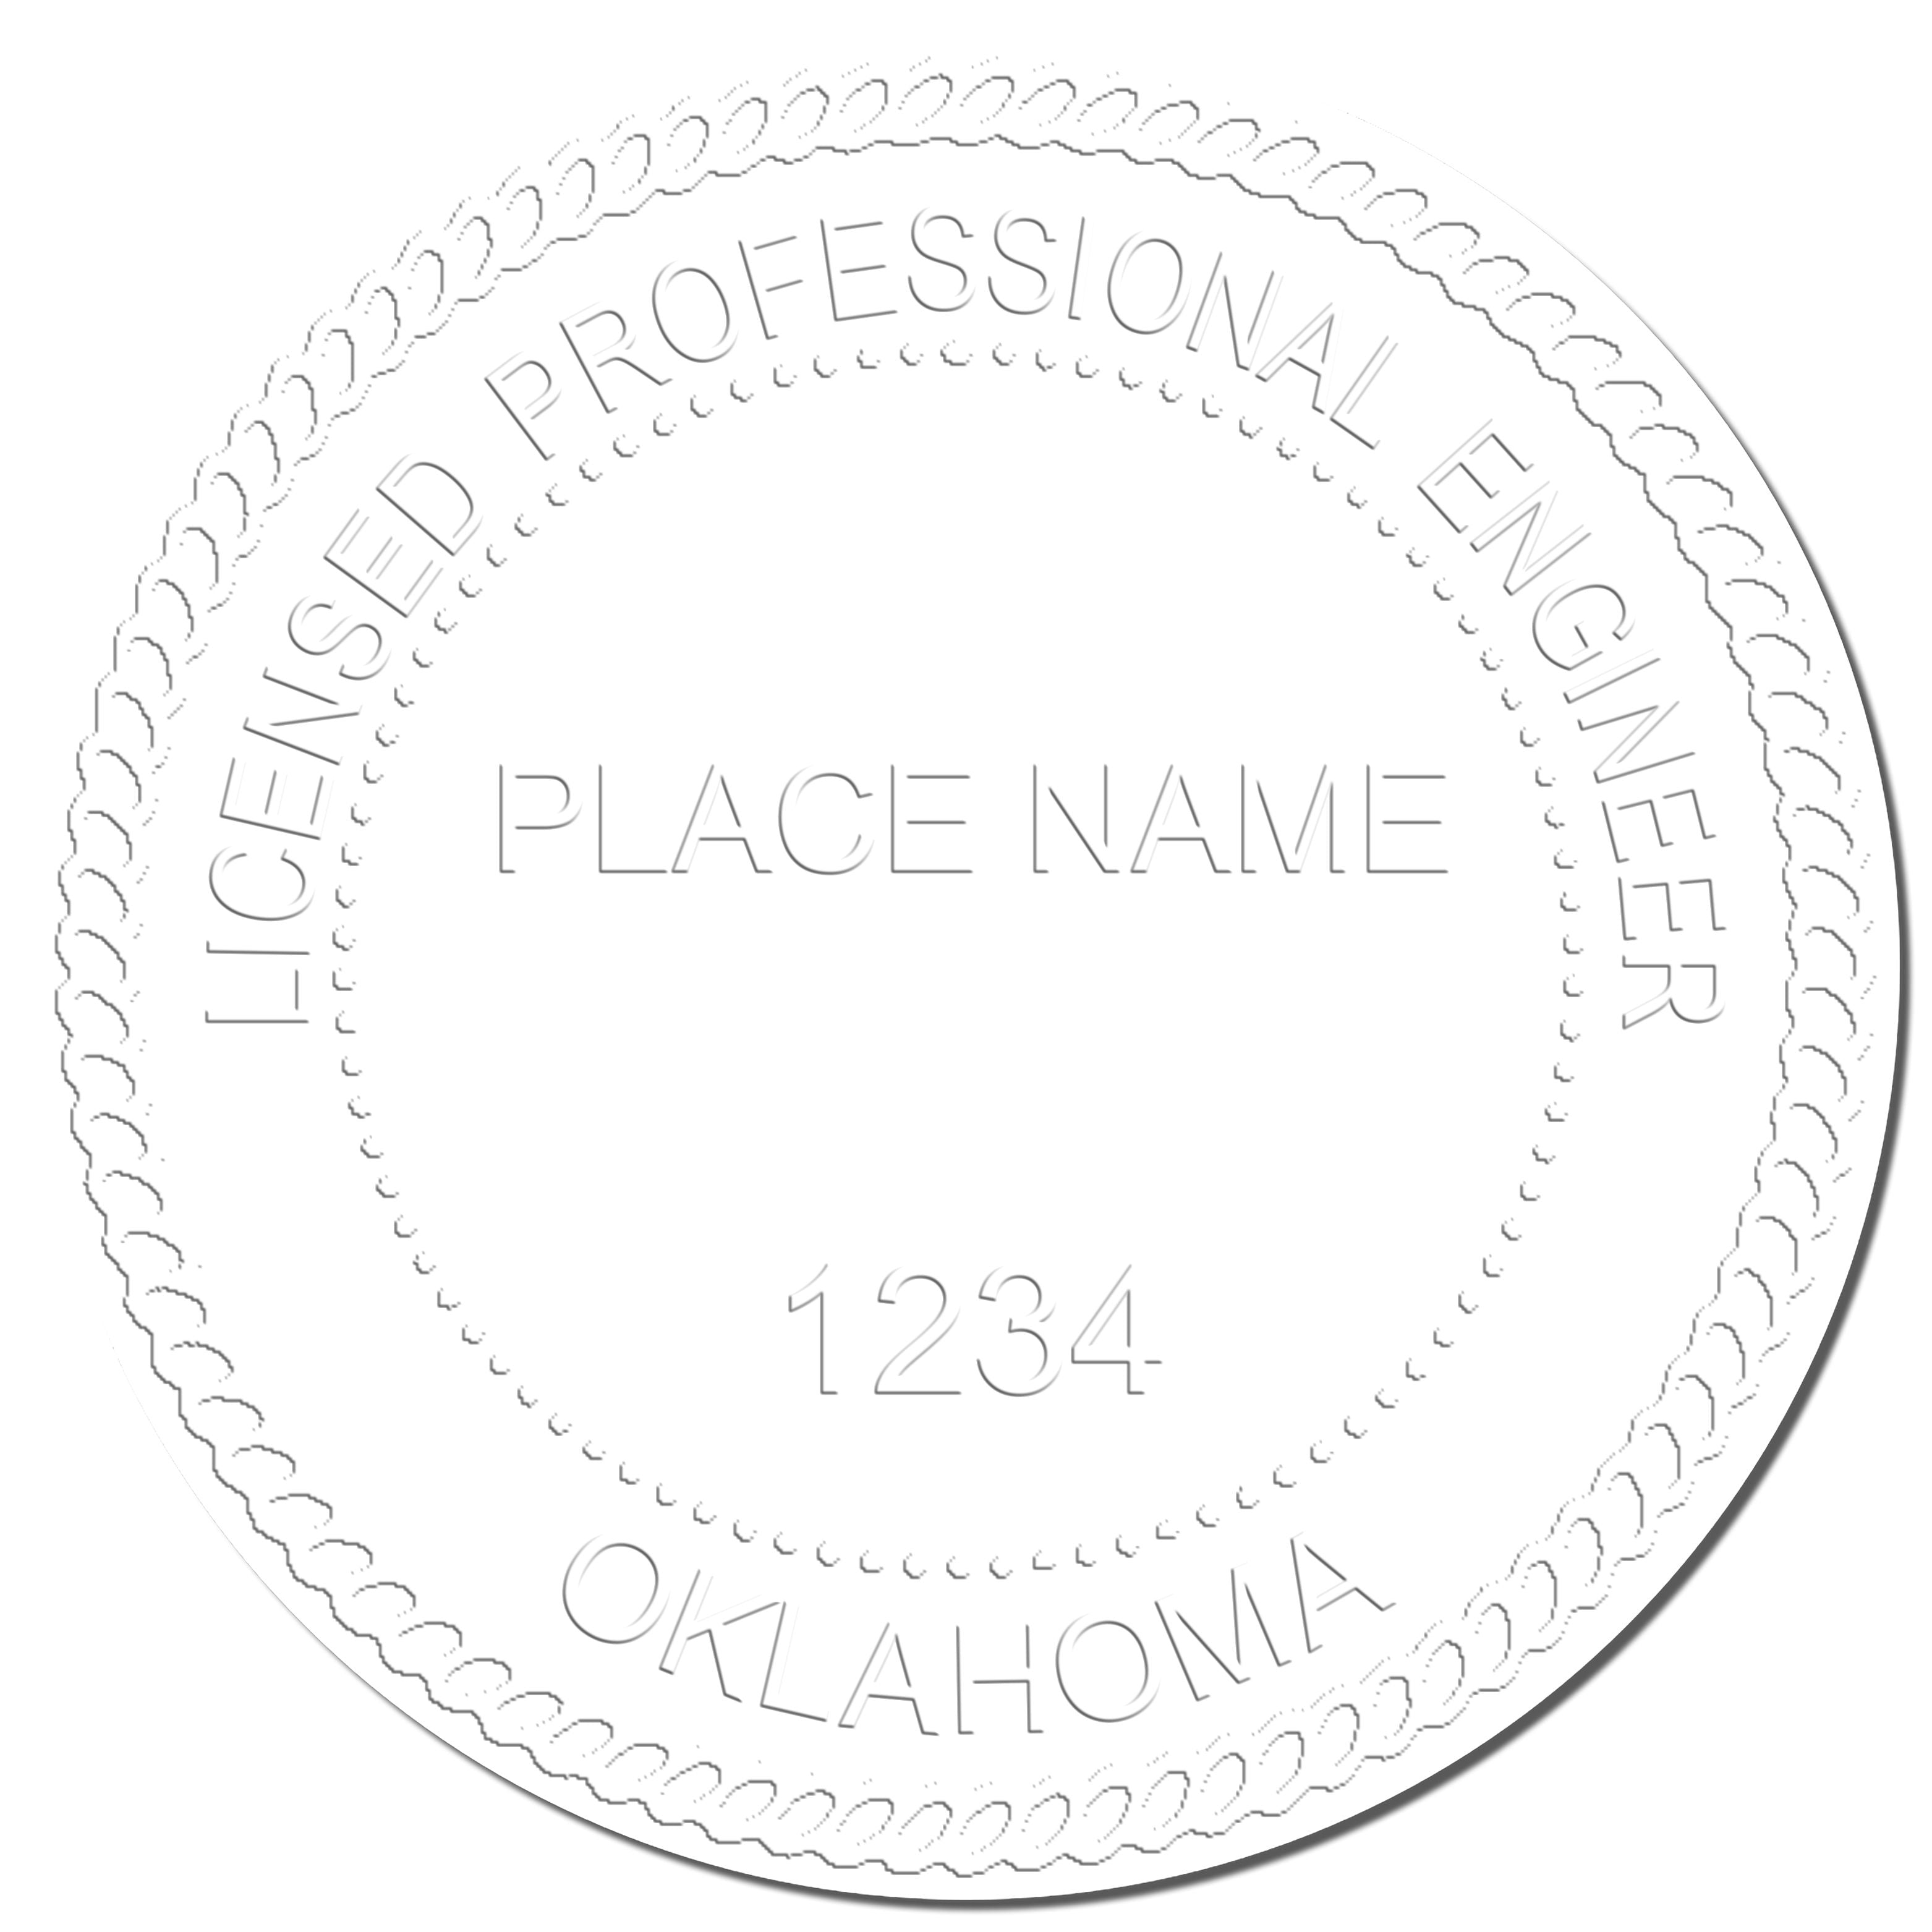 This paper is stamped with a sample imprint of the Heavy Duty Cast Iron Oklahoma Engineer Seal Embosser, signifying its quality and reliability.